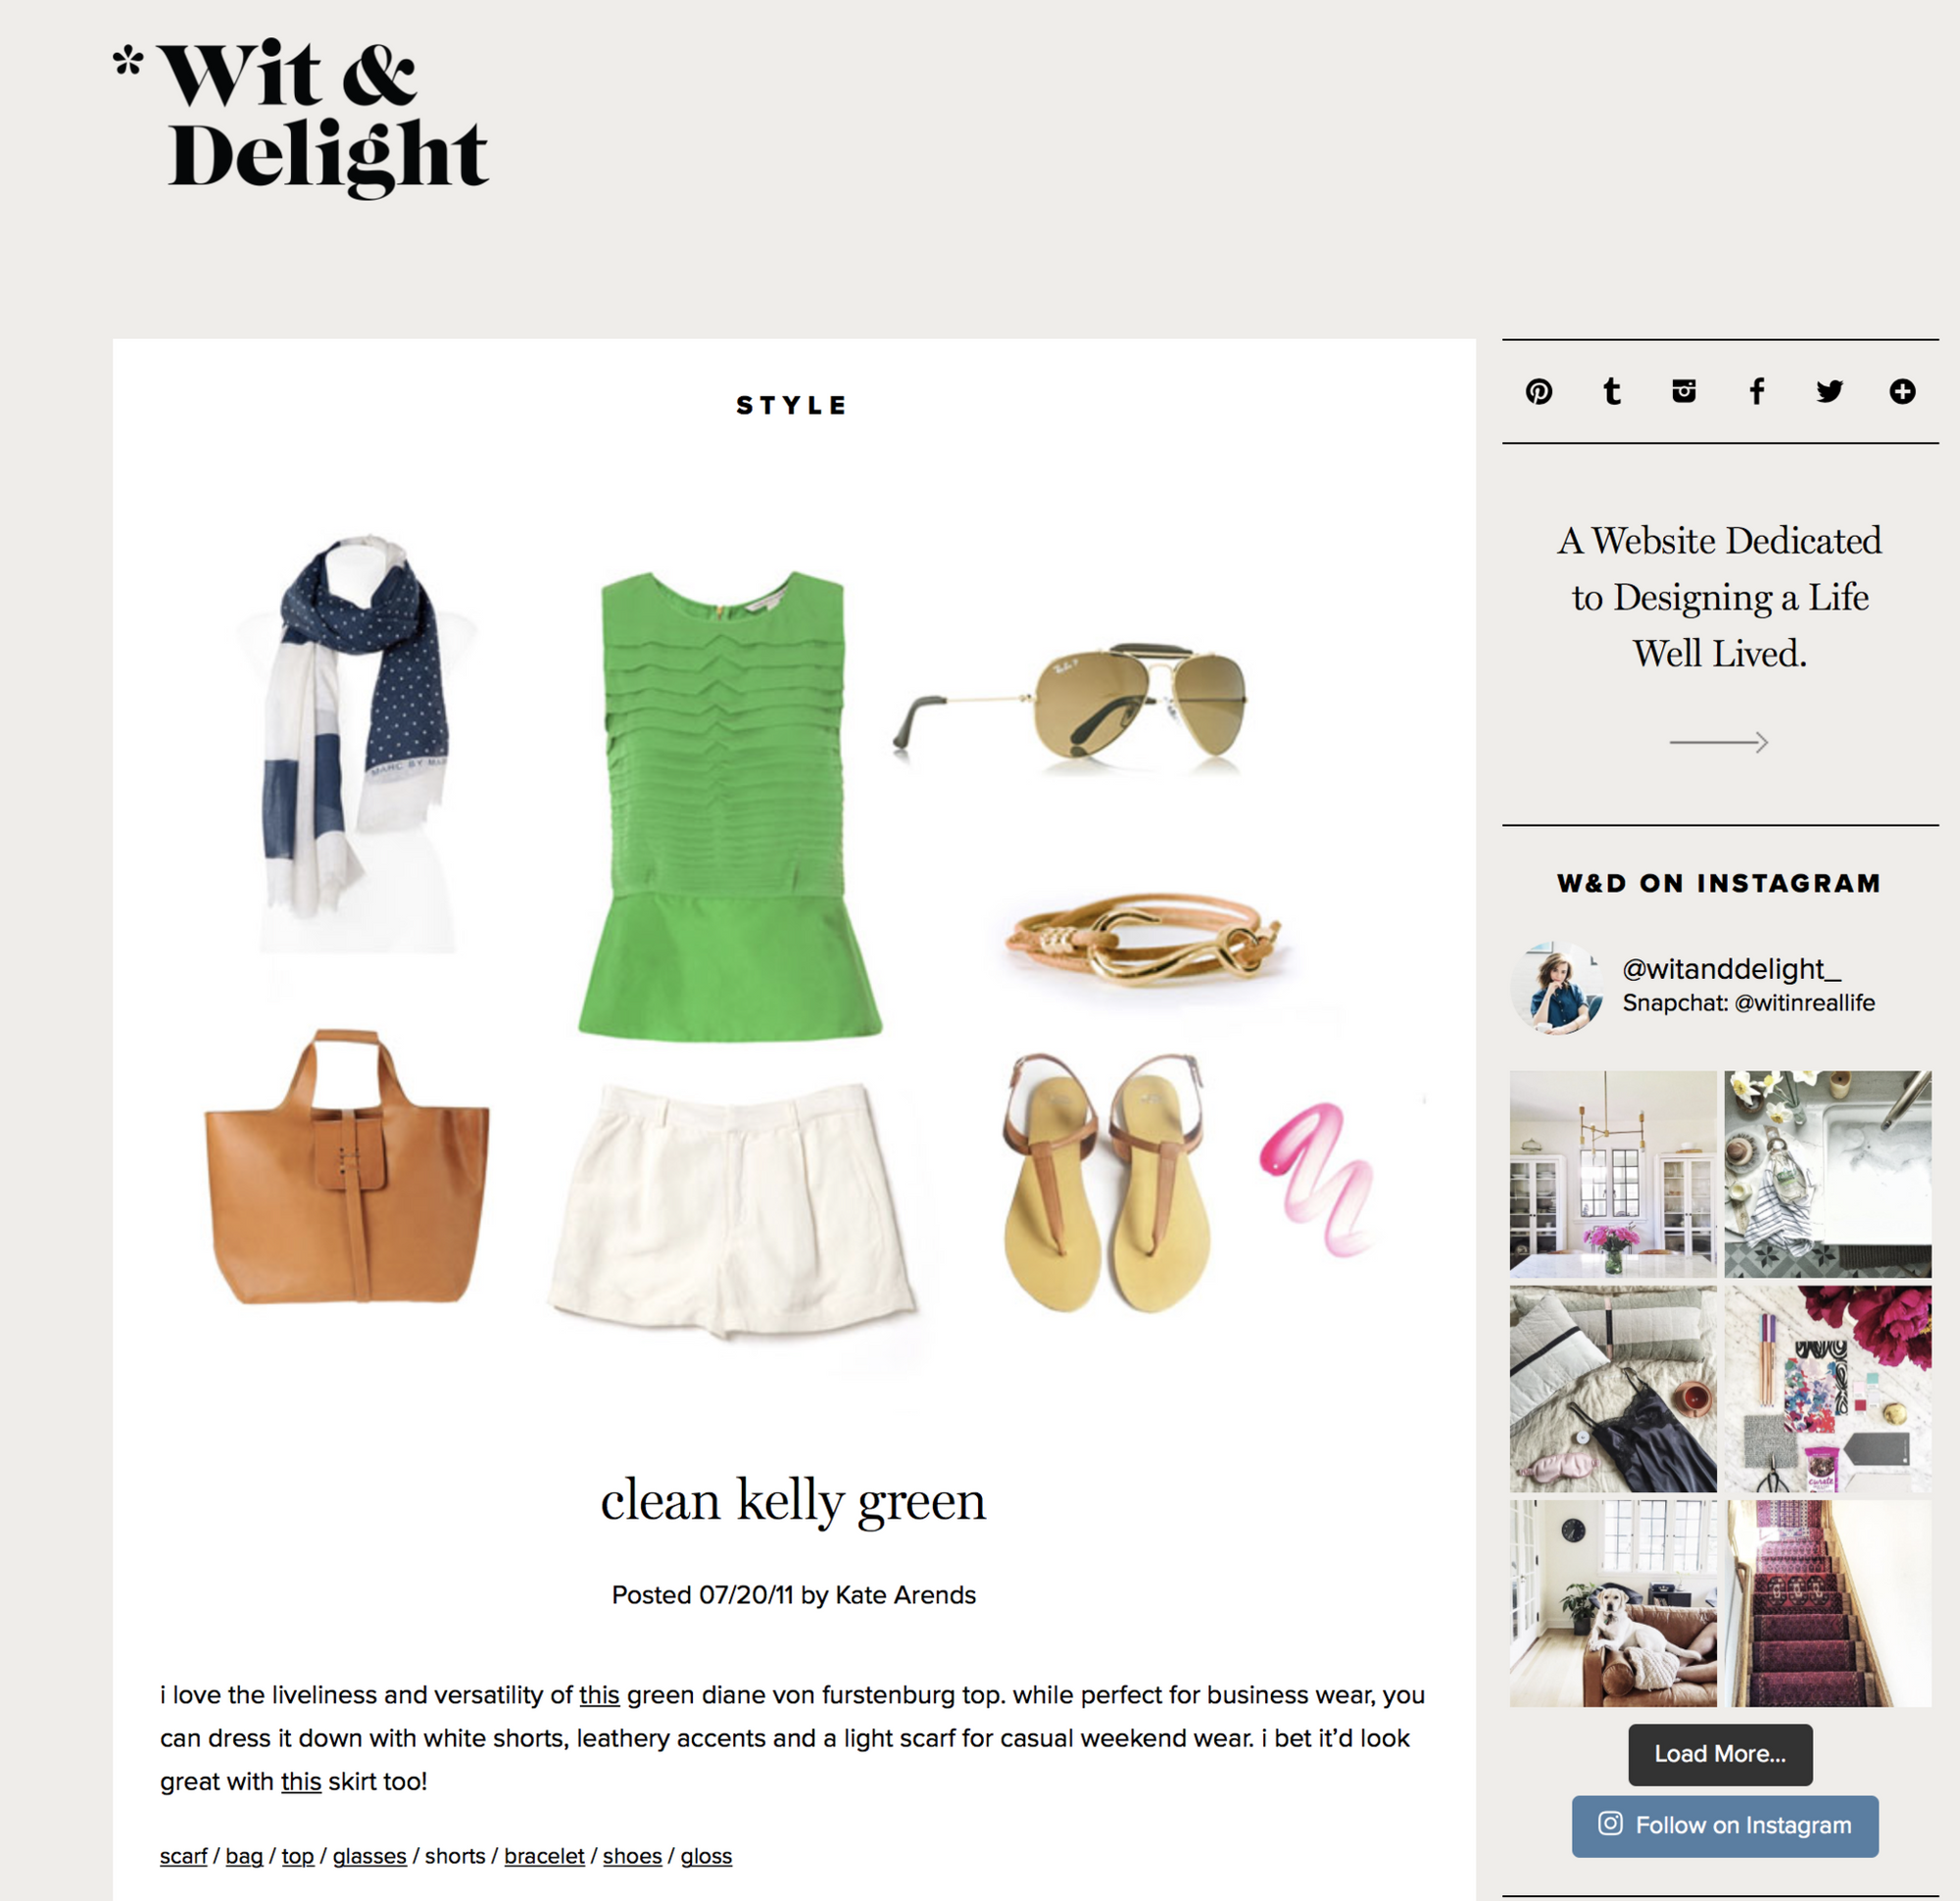 Wit + Delight, July 2011